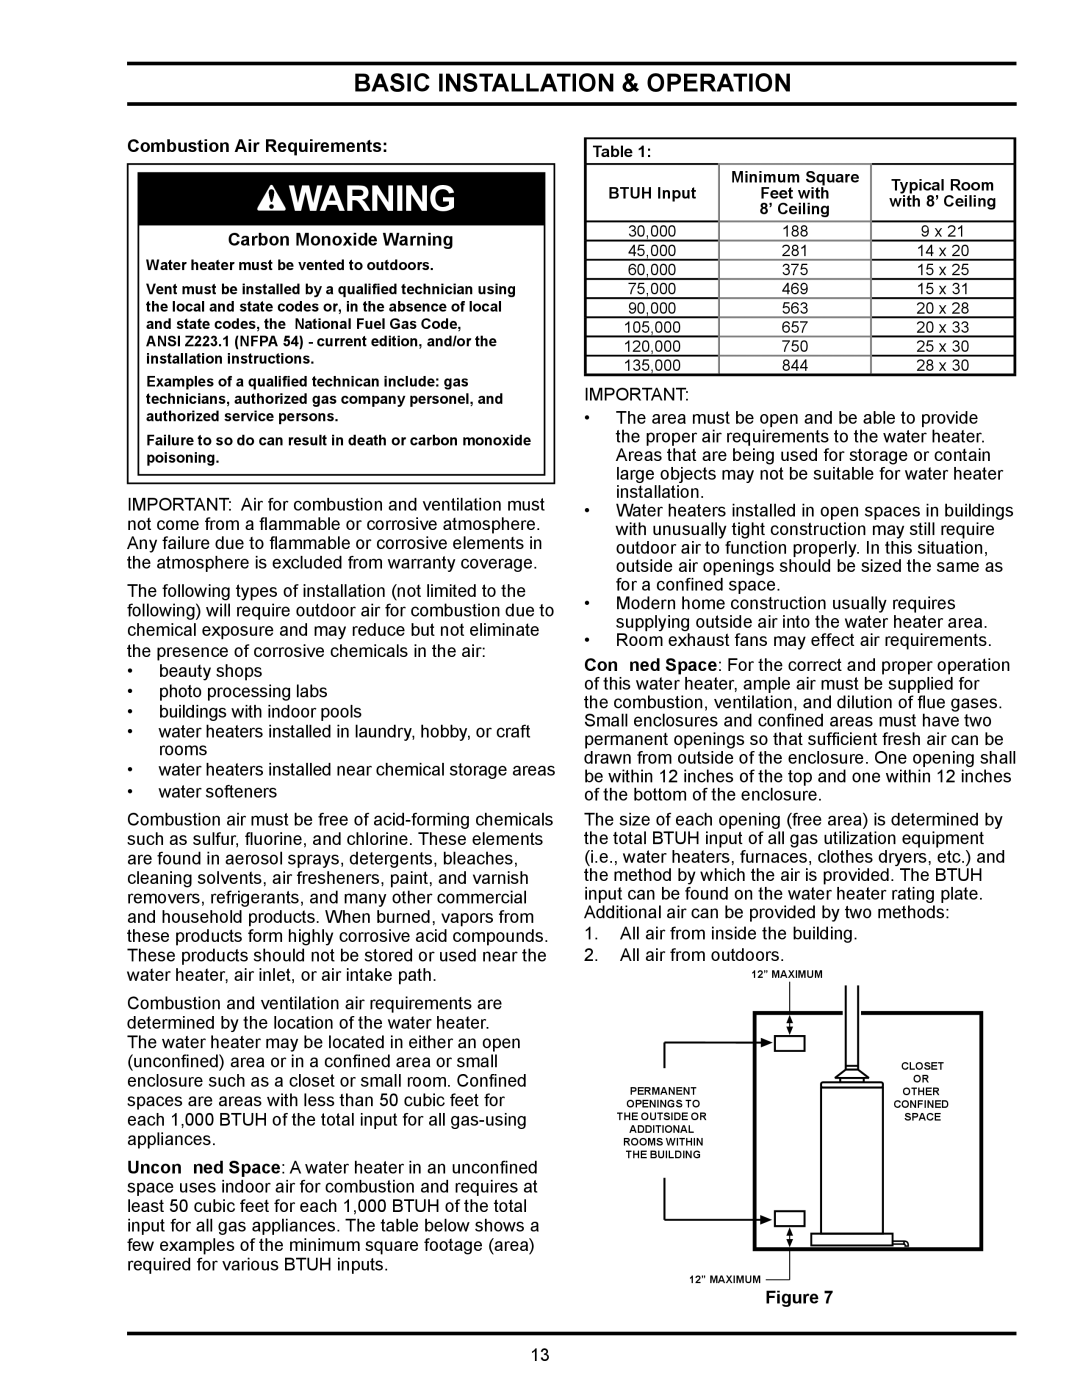 State Industries GS6, GSX, GPX manual Combustion Air Requirements, Carbon Monoxide Warning 